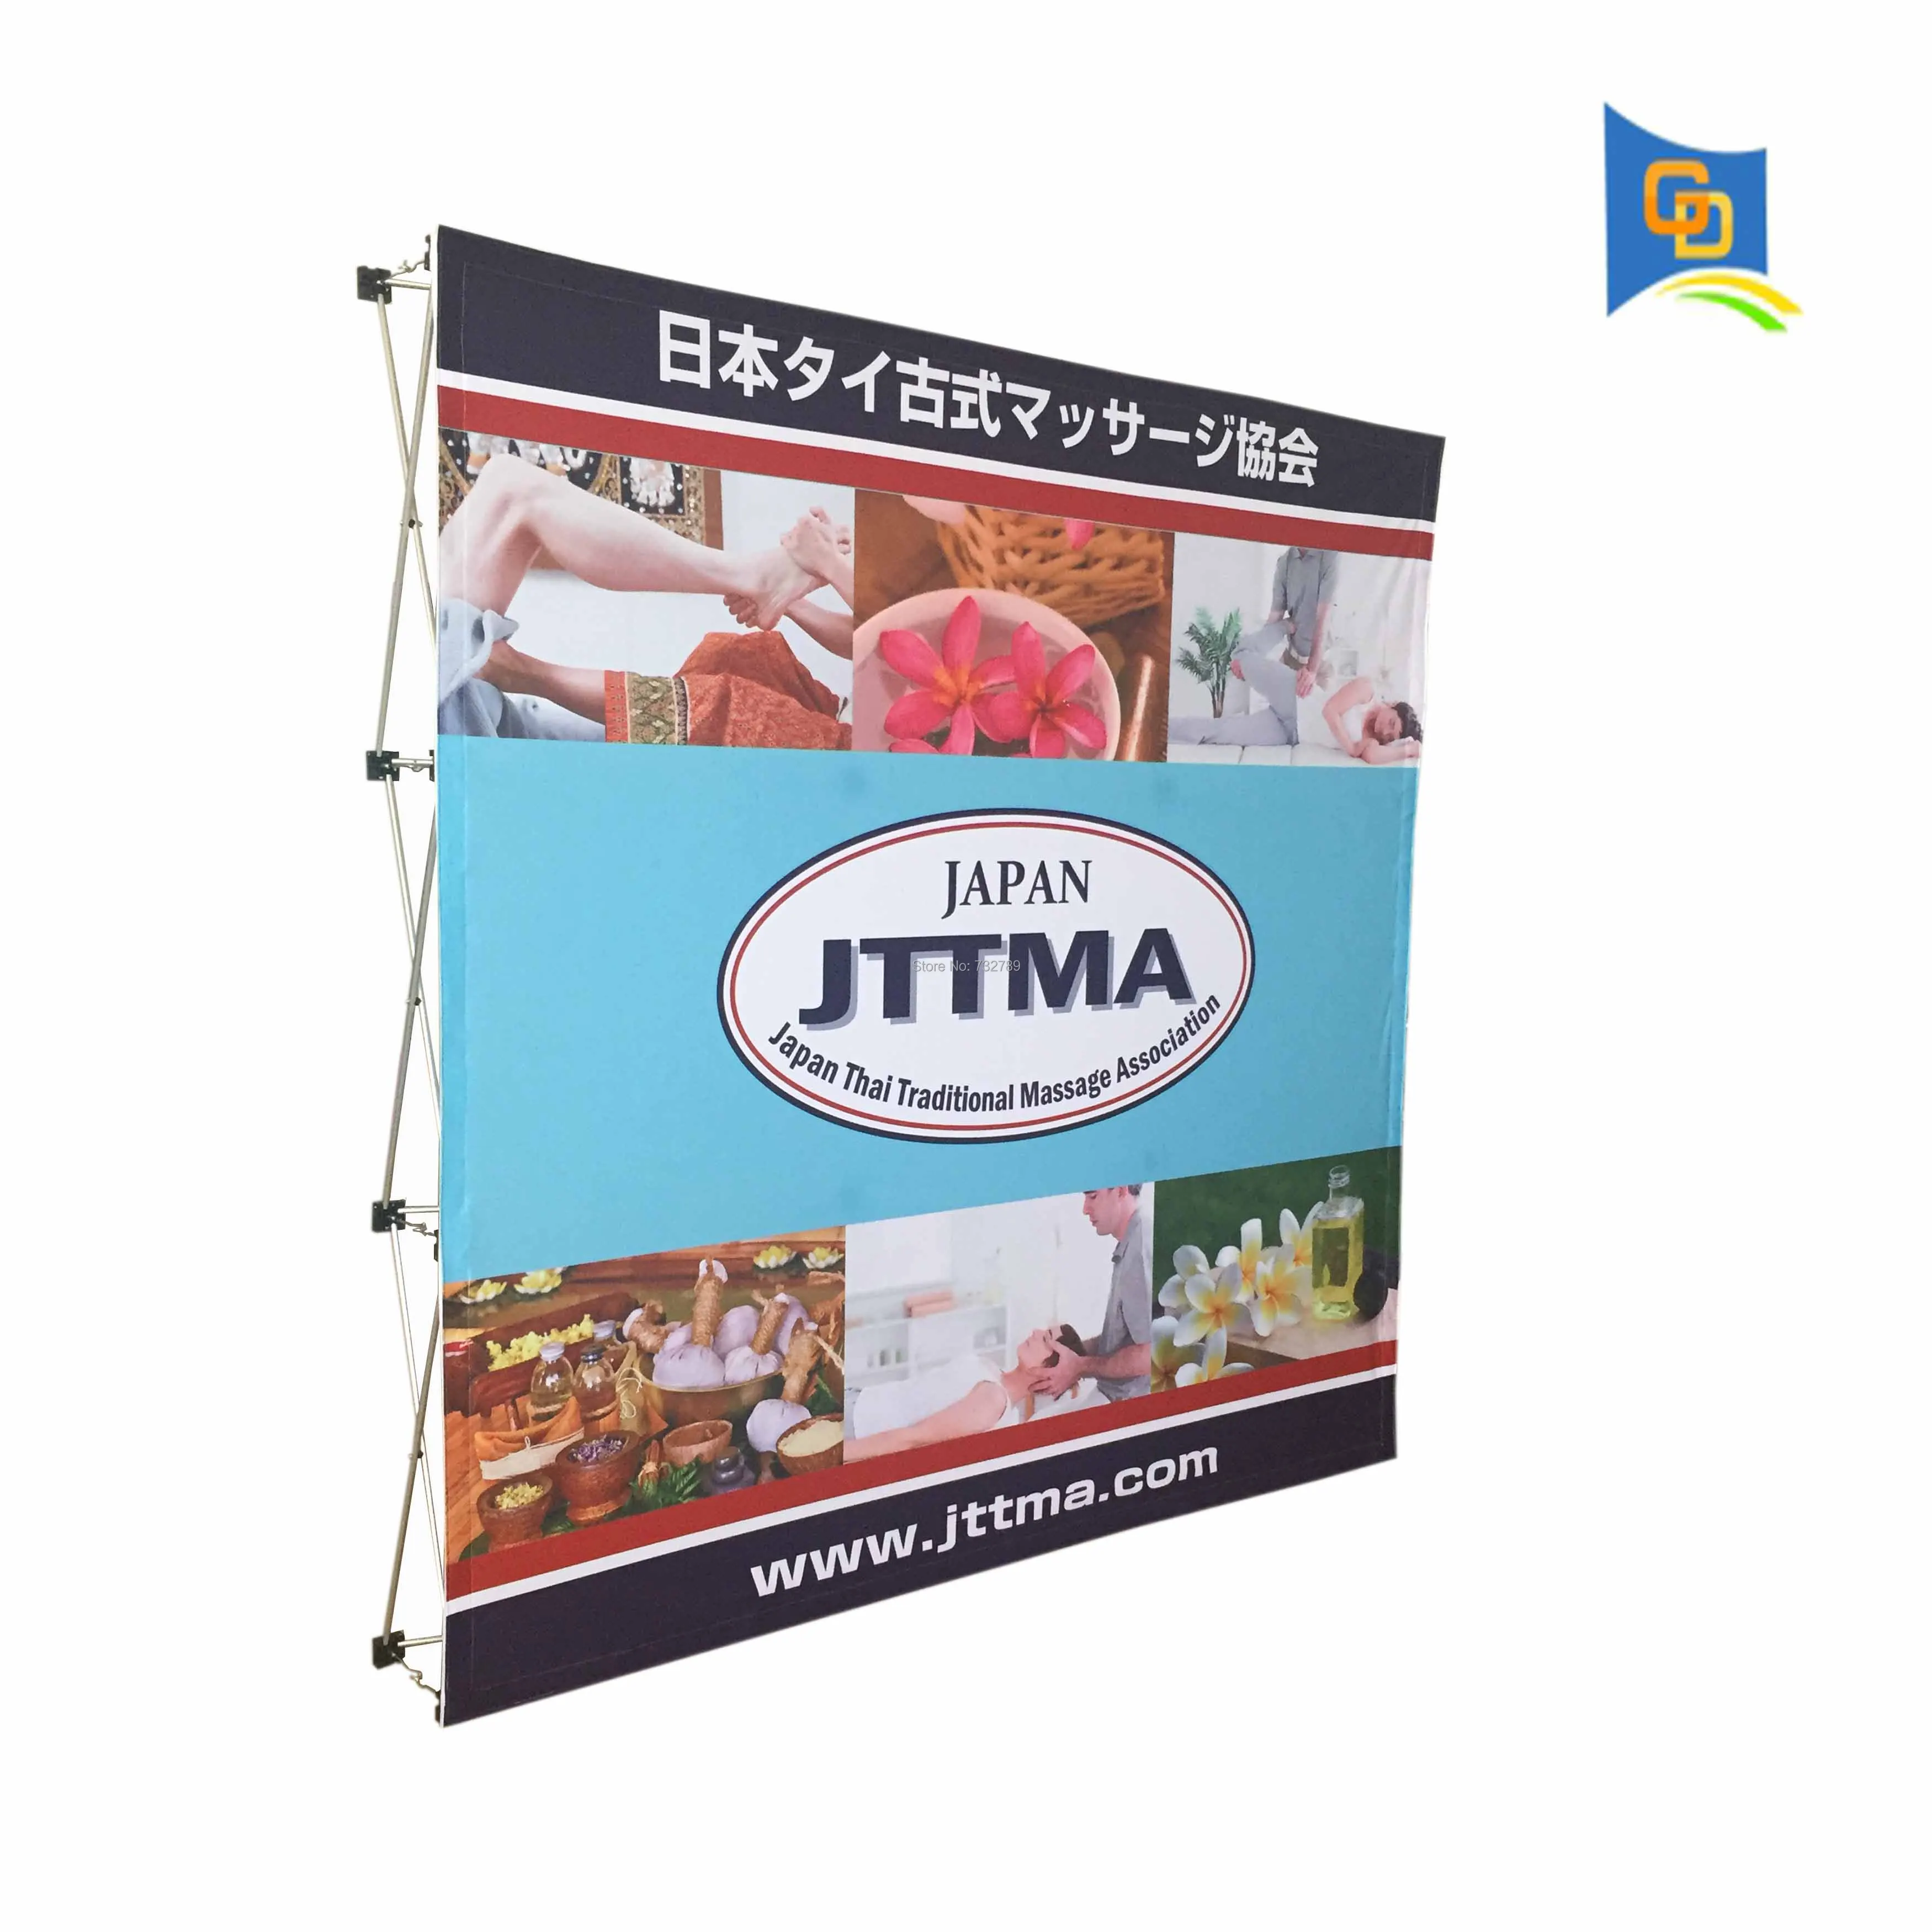 

7.5ft Trade Show Tension Fabric Backdrop Exhibition Pop up Display Banner Stand